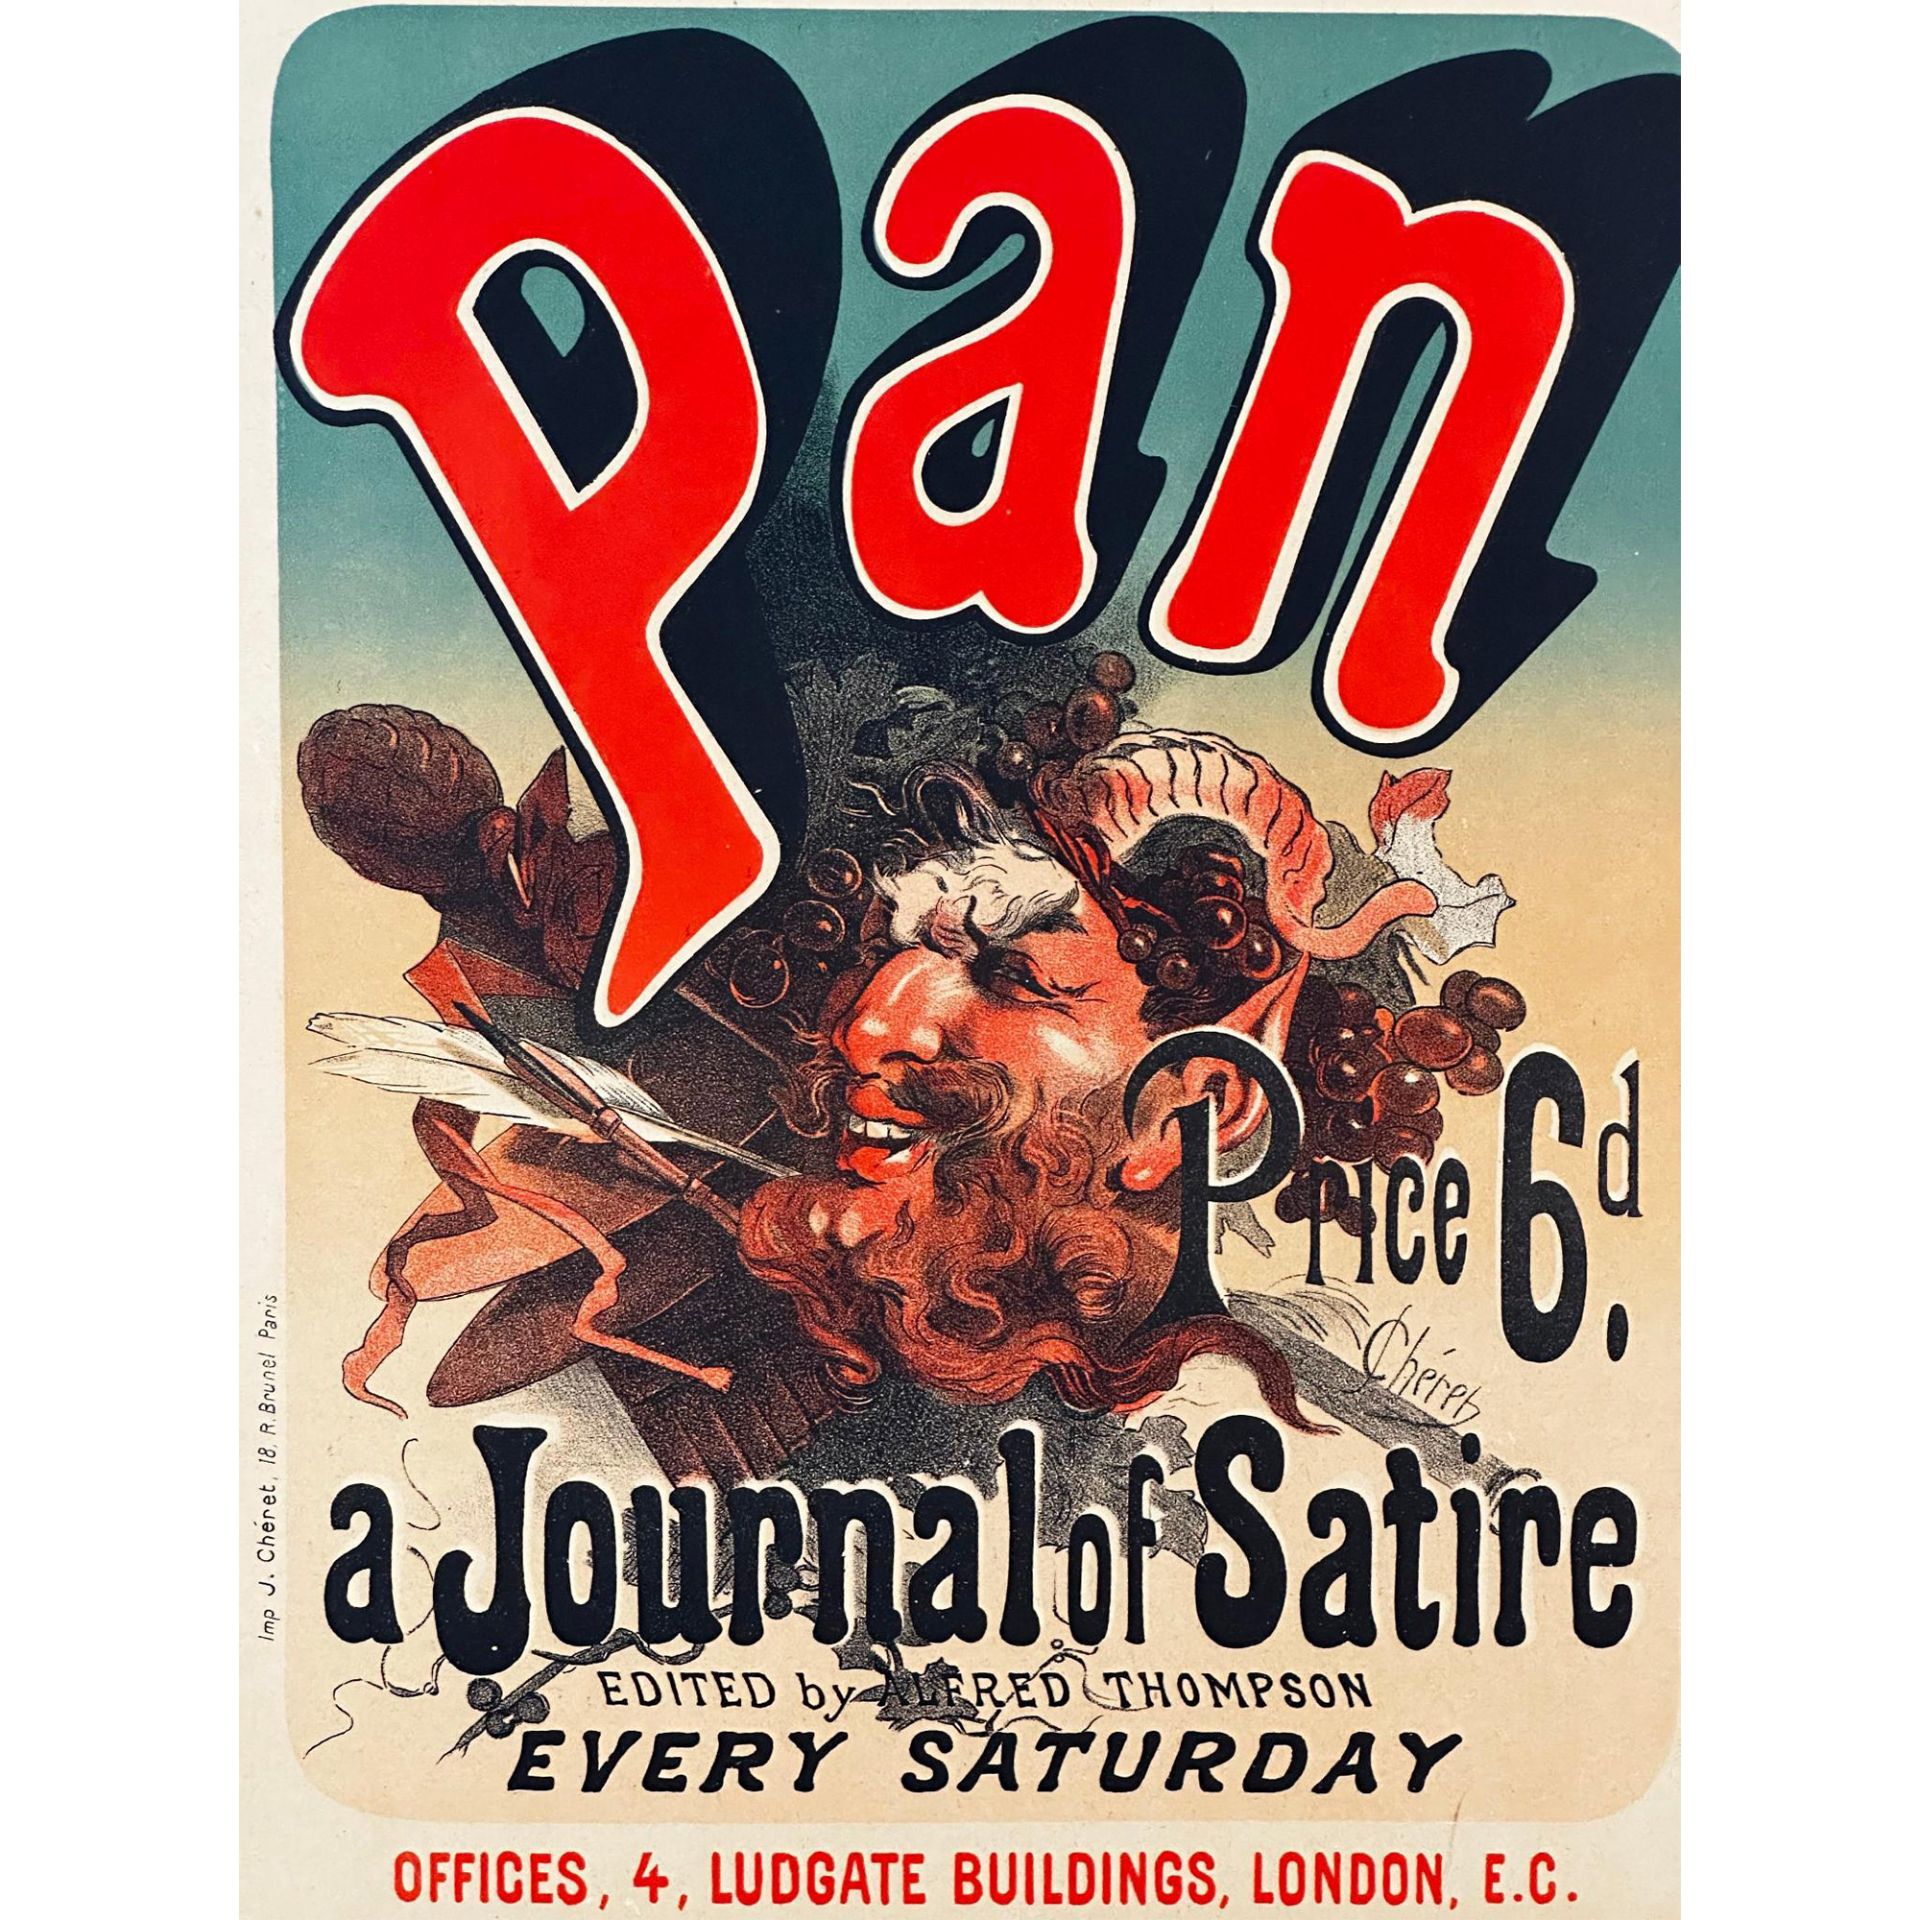 Pan, A Journal Of Satire, lithograph